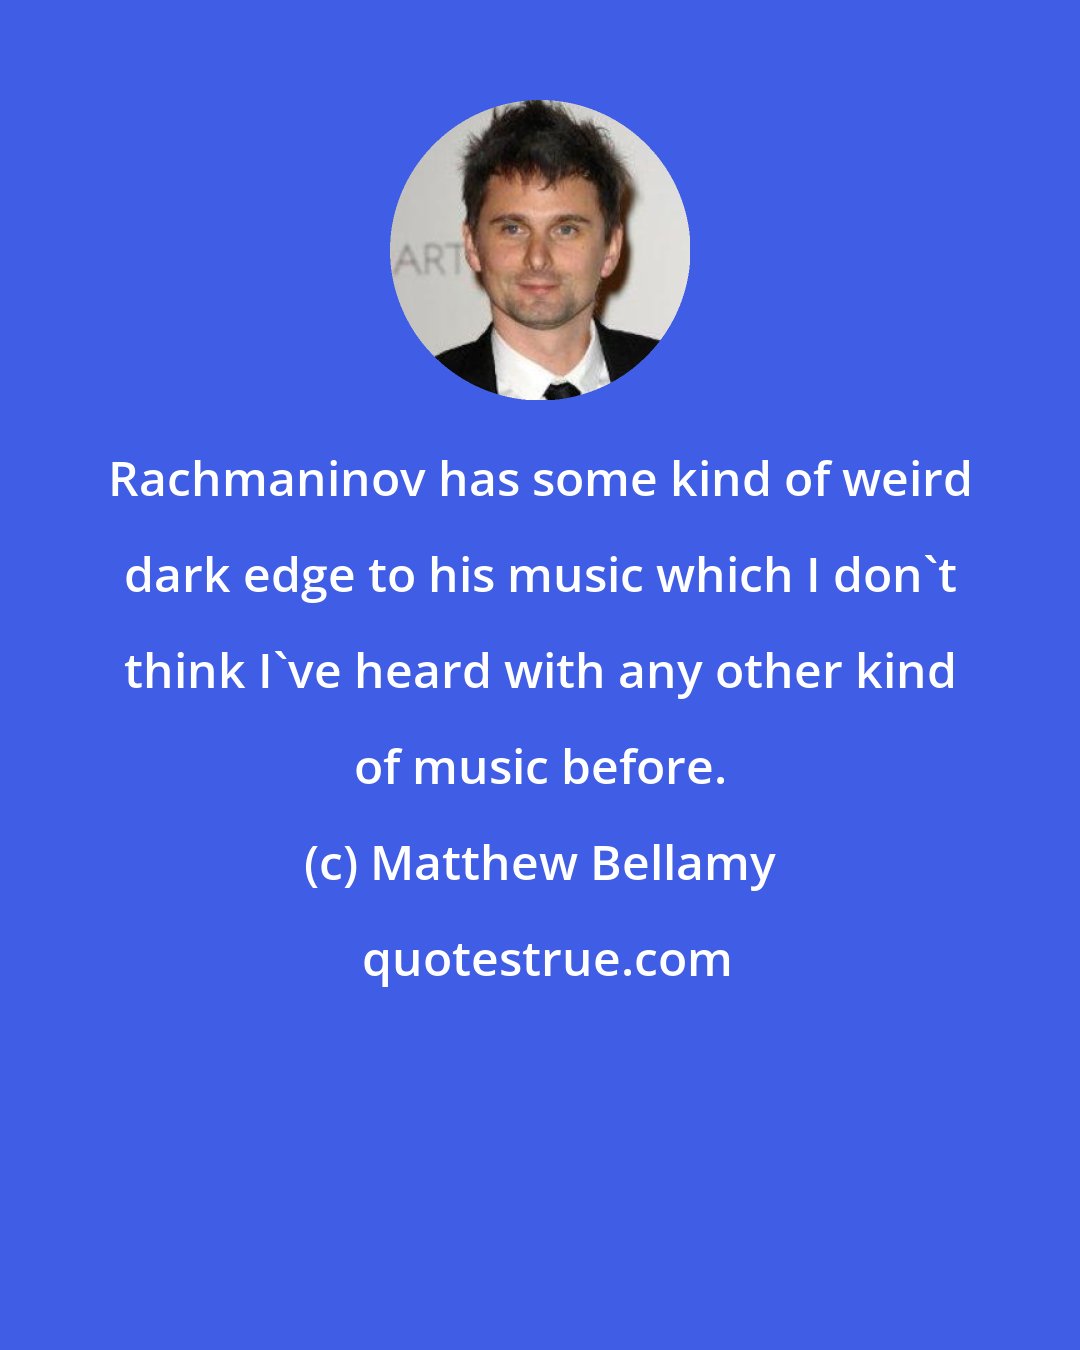 Matthew Bellamy: Rachmaninov has some kind of weird dark edge to his music which I don't think I've heard with any other kind of music before.